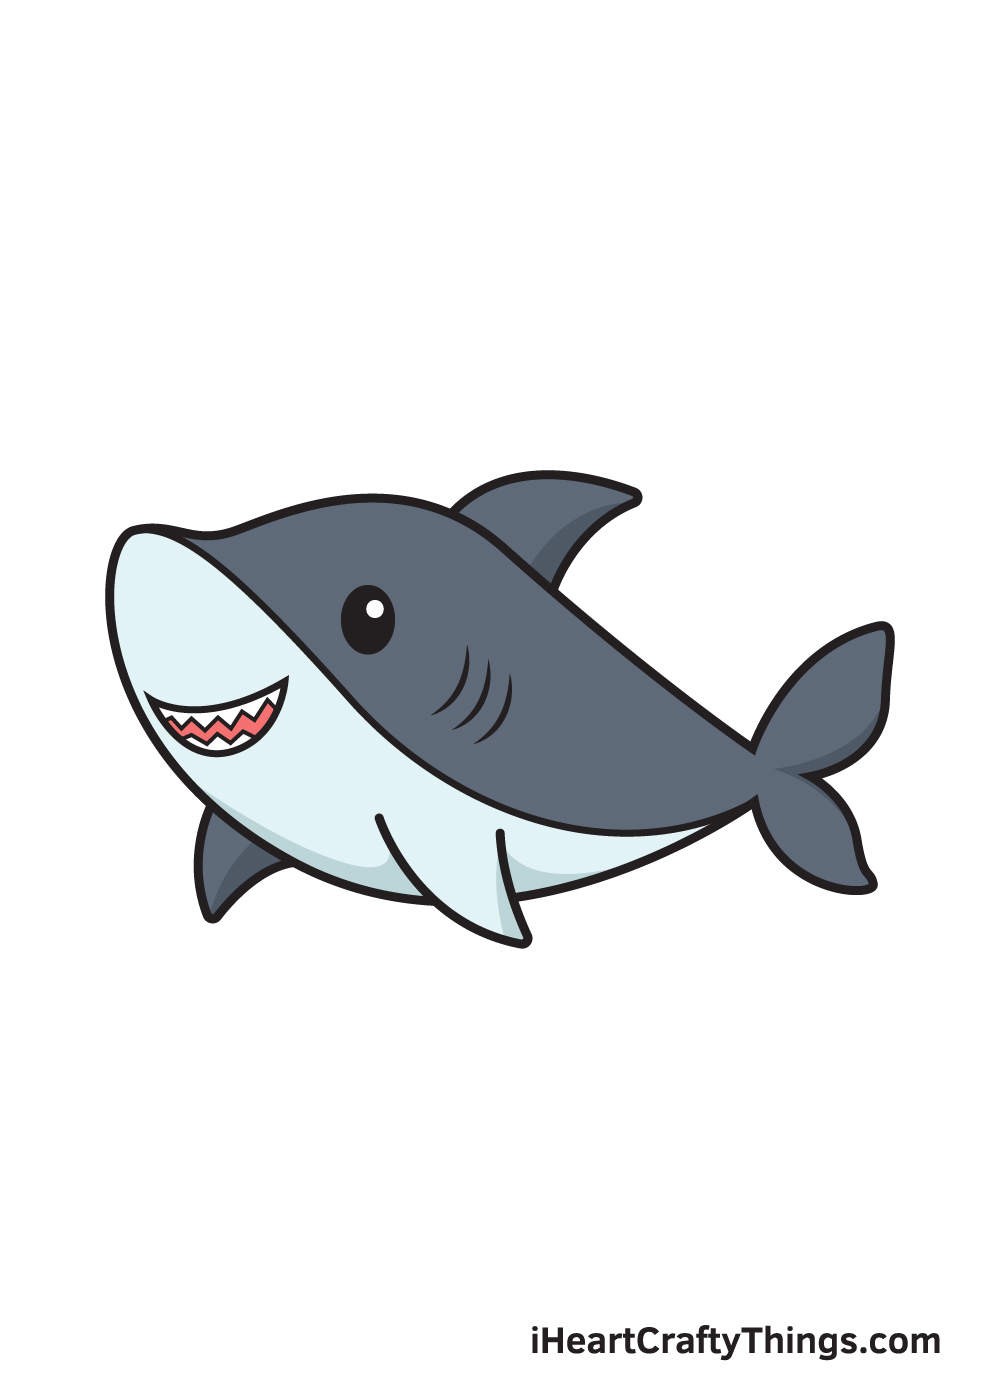 How To Draw A Shark Cartoon » Attentionoperation